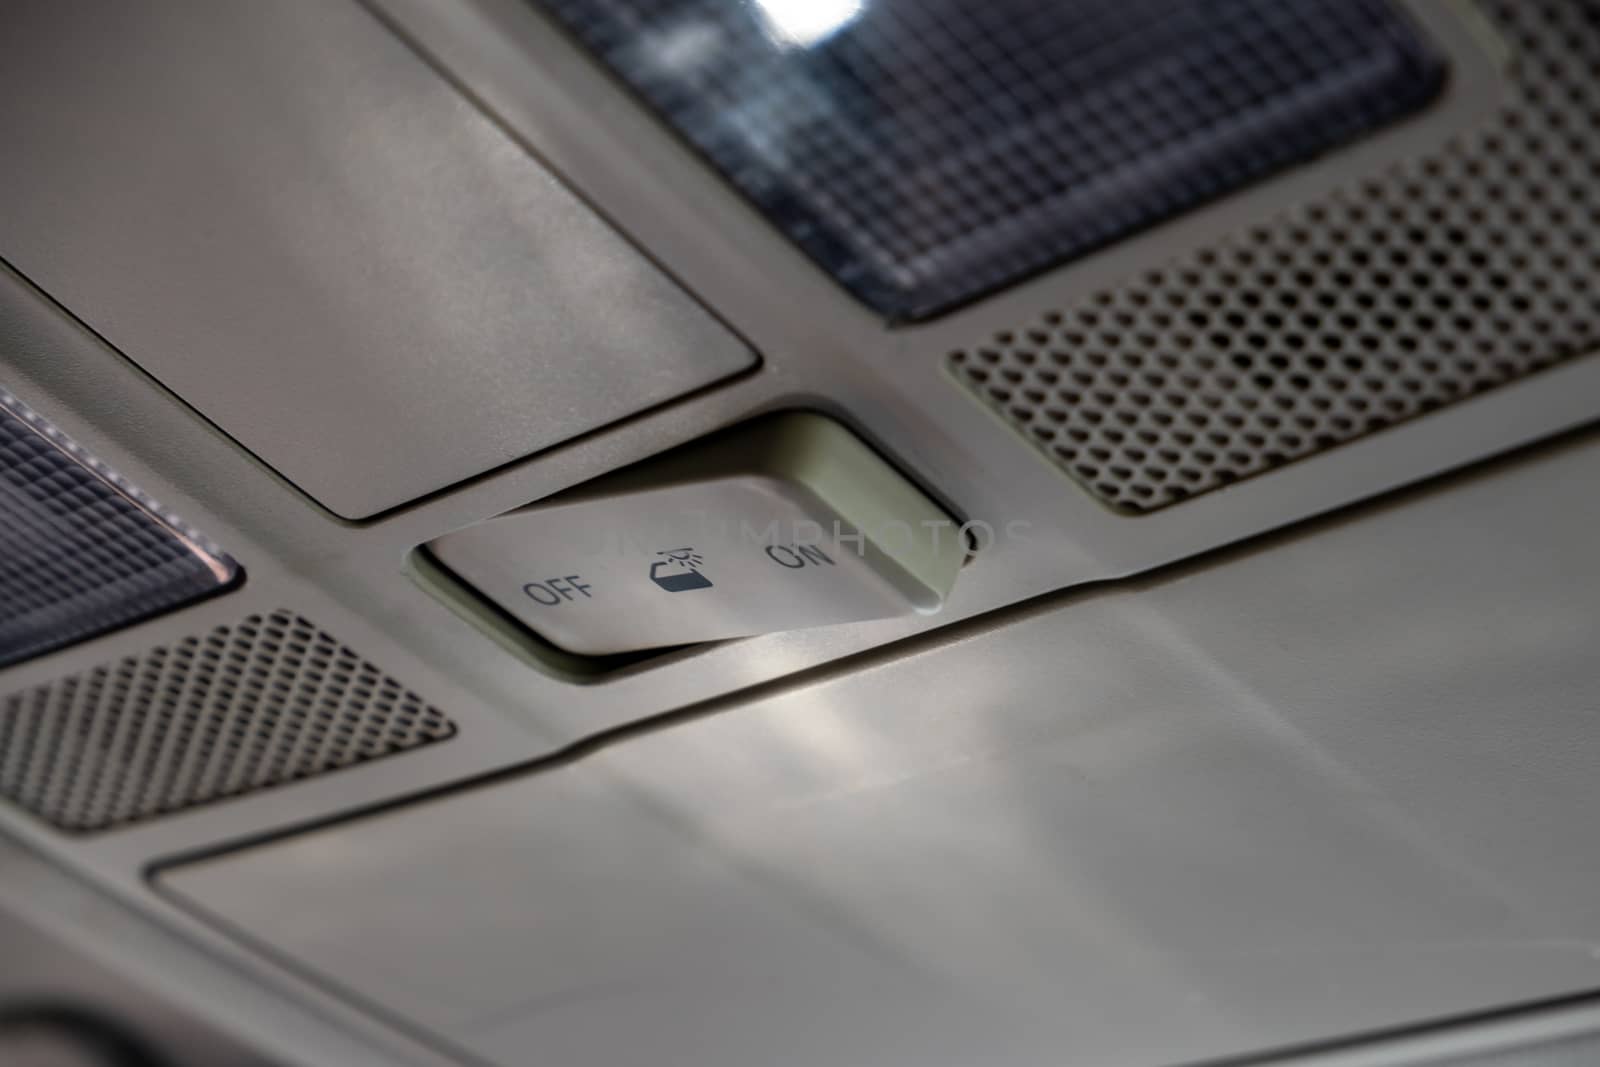 A switch on the roof of a car controlling the behavior of the interior lighting is switched to the "off" position.